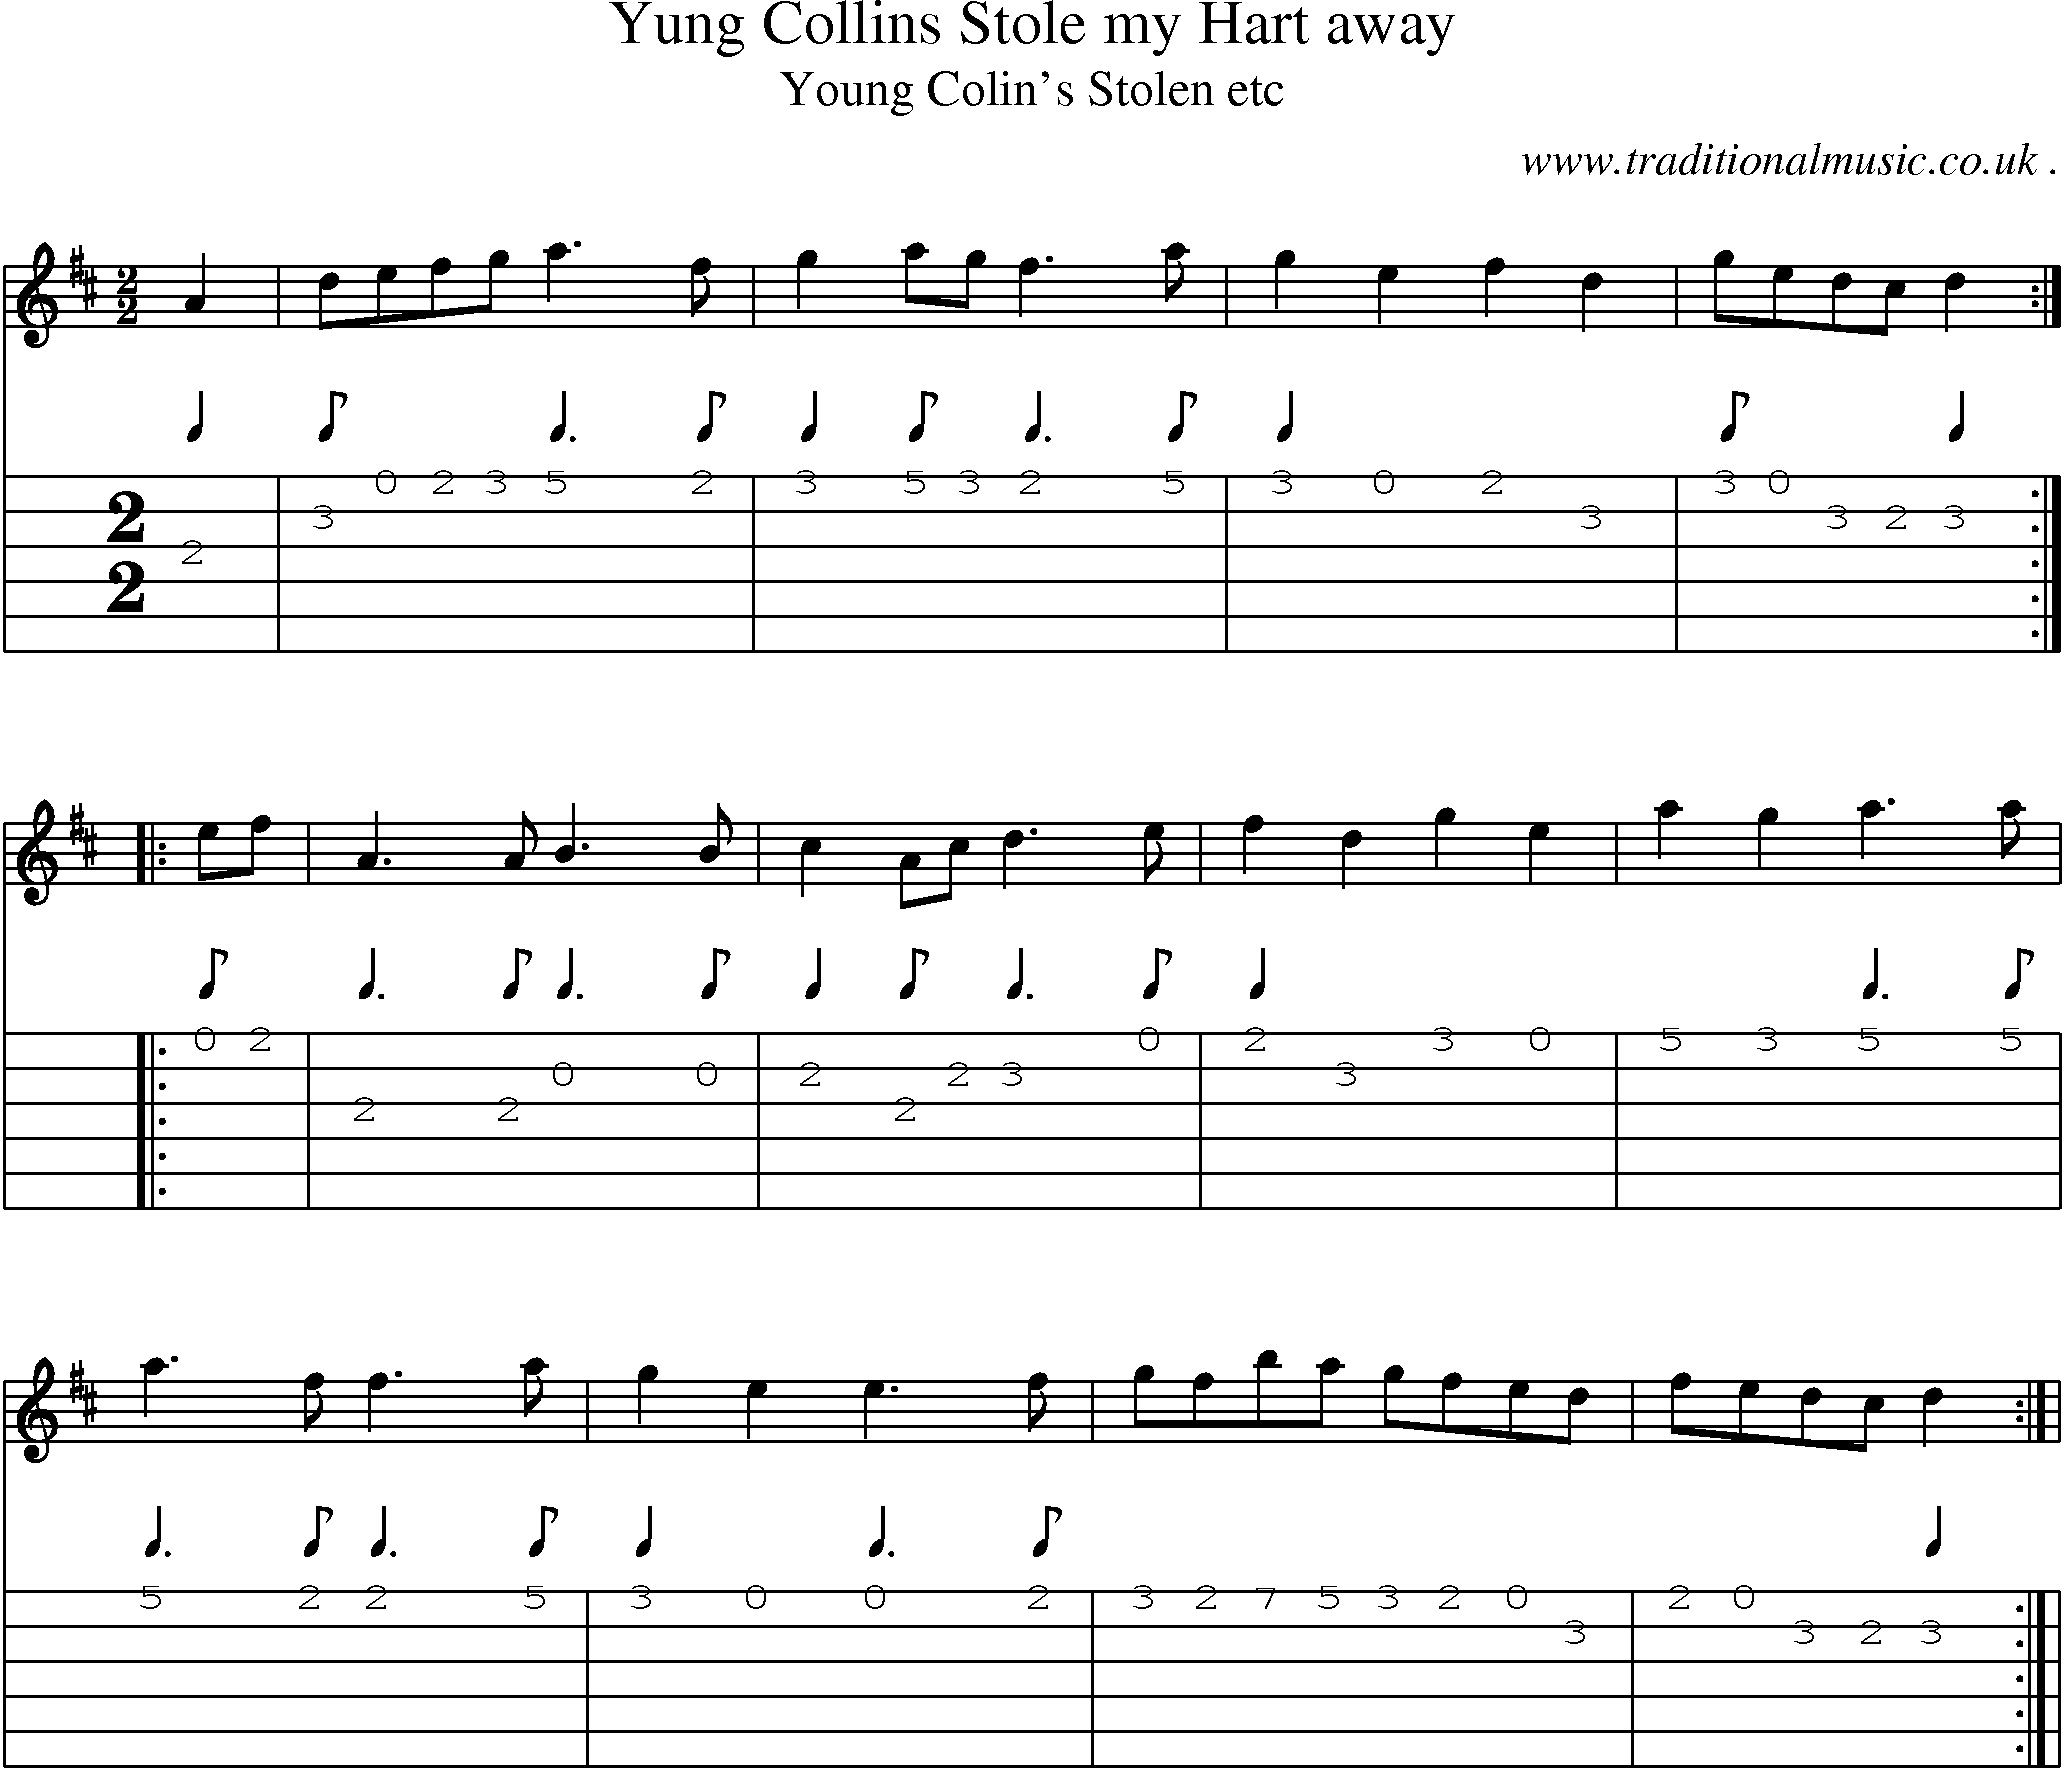 Sheet-Music and Guitar Tabs for Yung Collins Stole My Hart Away